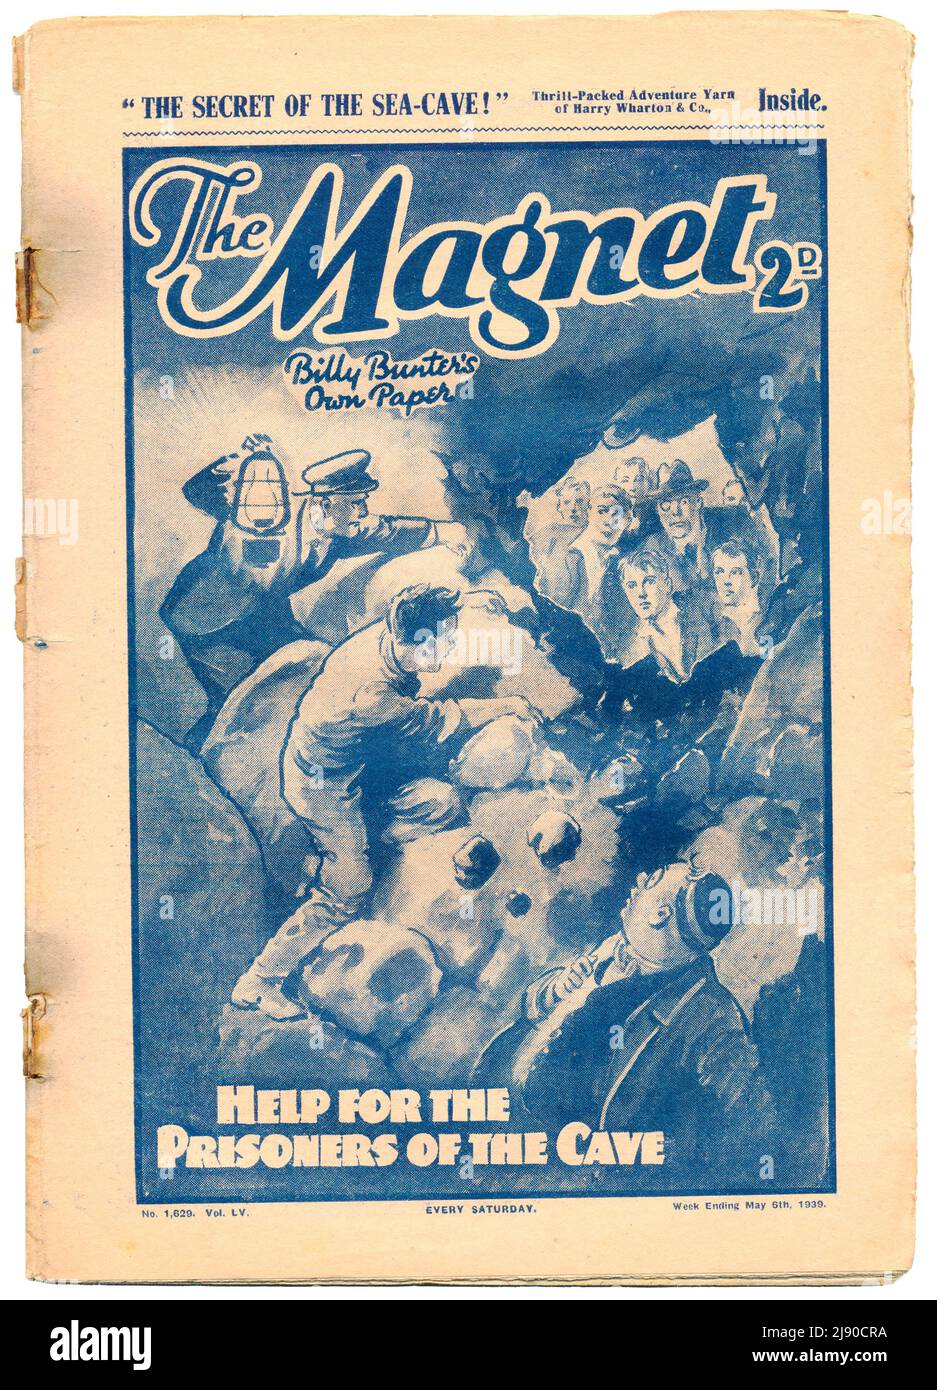 The Secret of the Sea Cave! story by Frank Richards cover of The Magnet, Vol 55, (1629), 6 May 1939, boys adventure stories Stock Photo